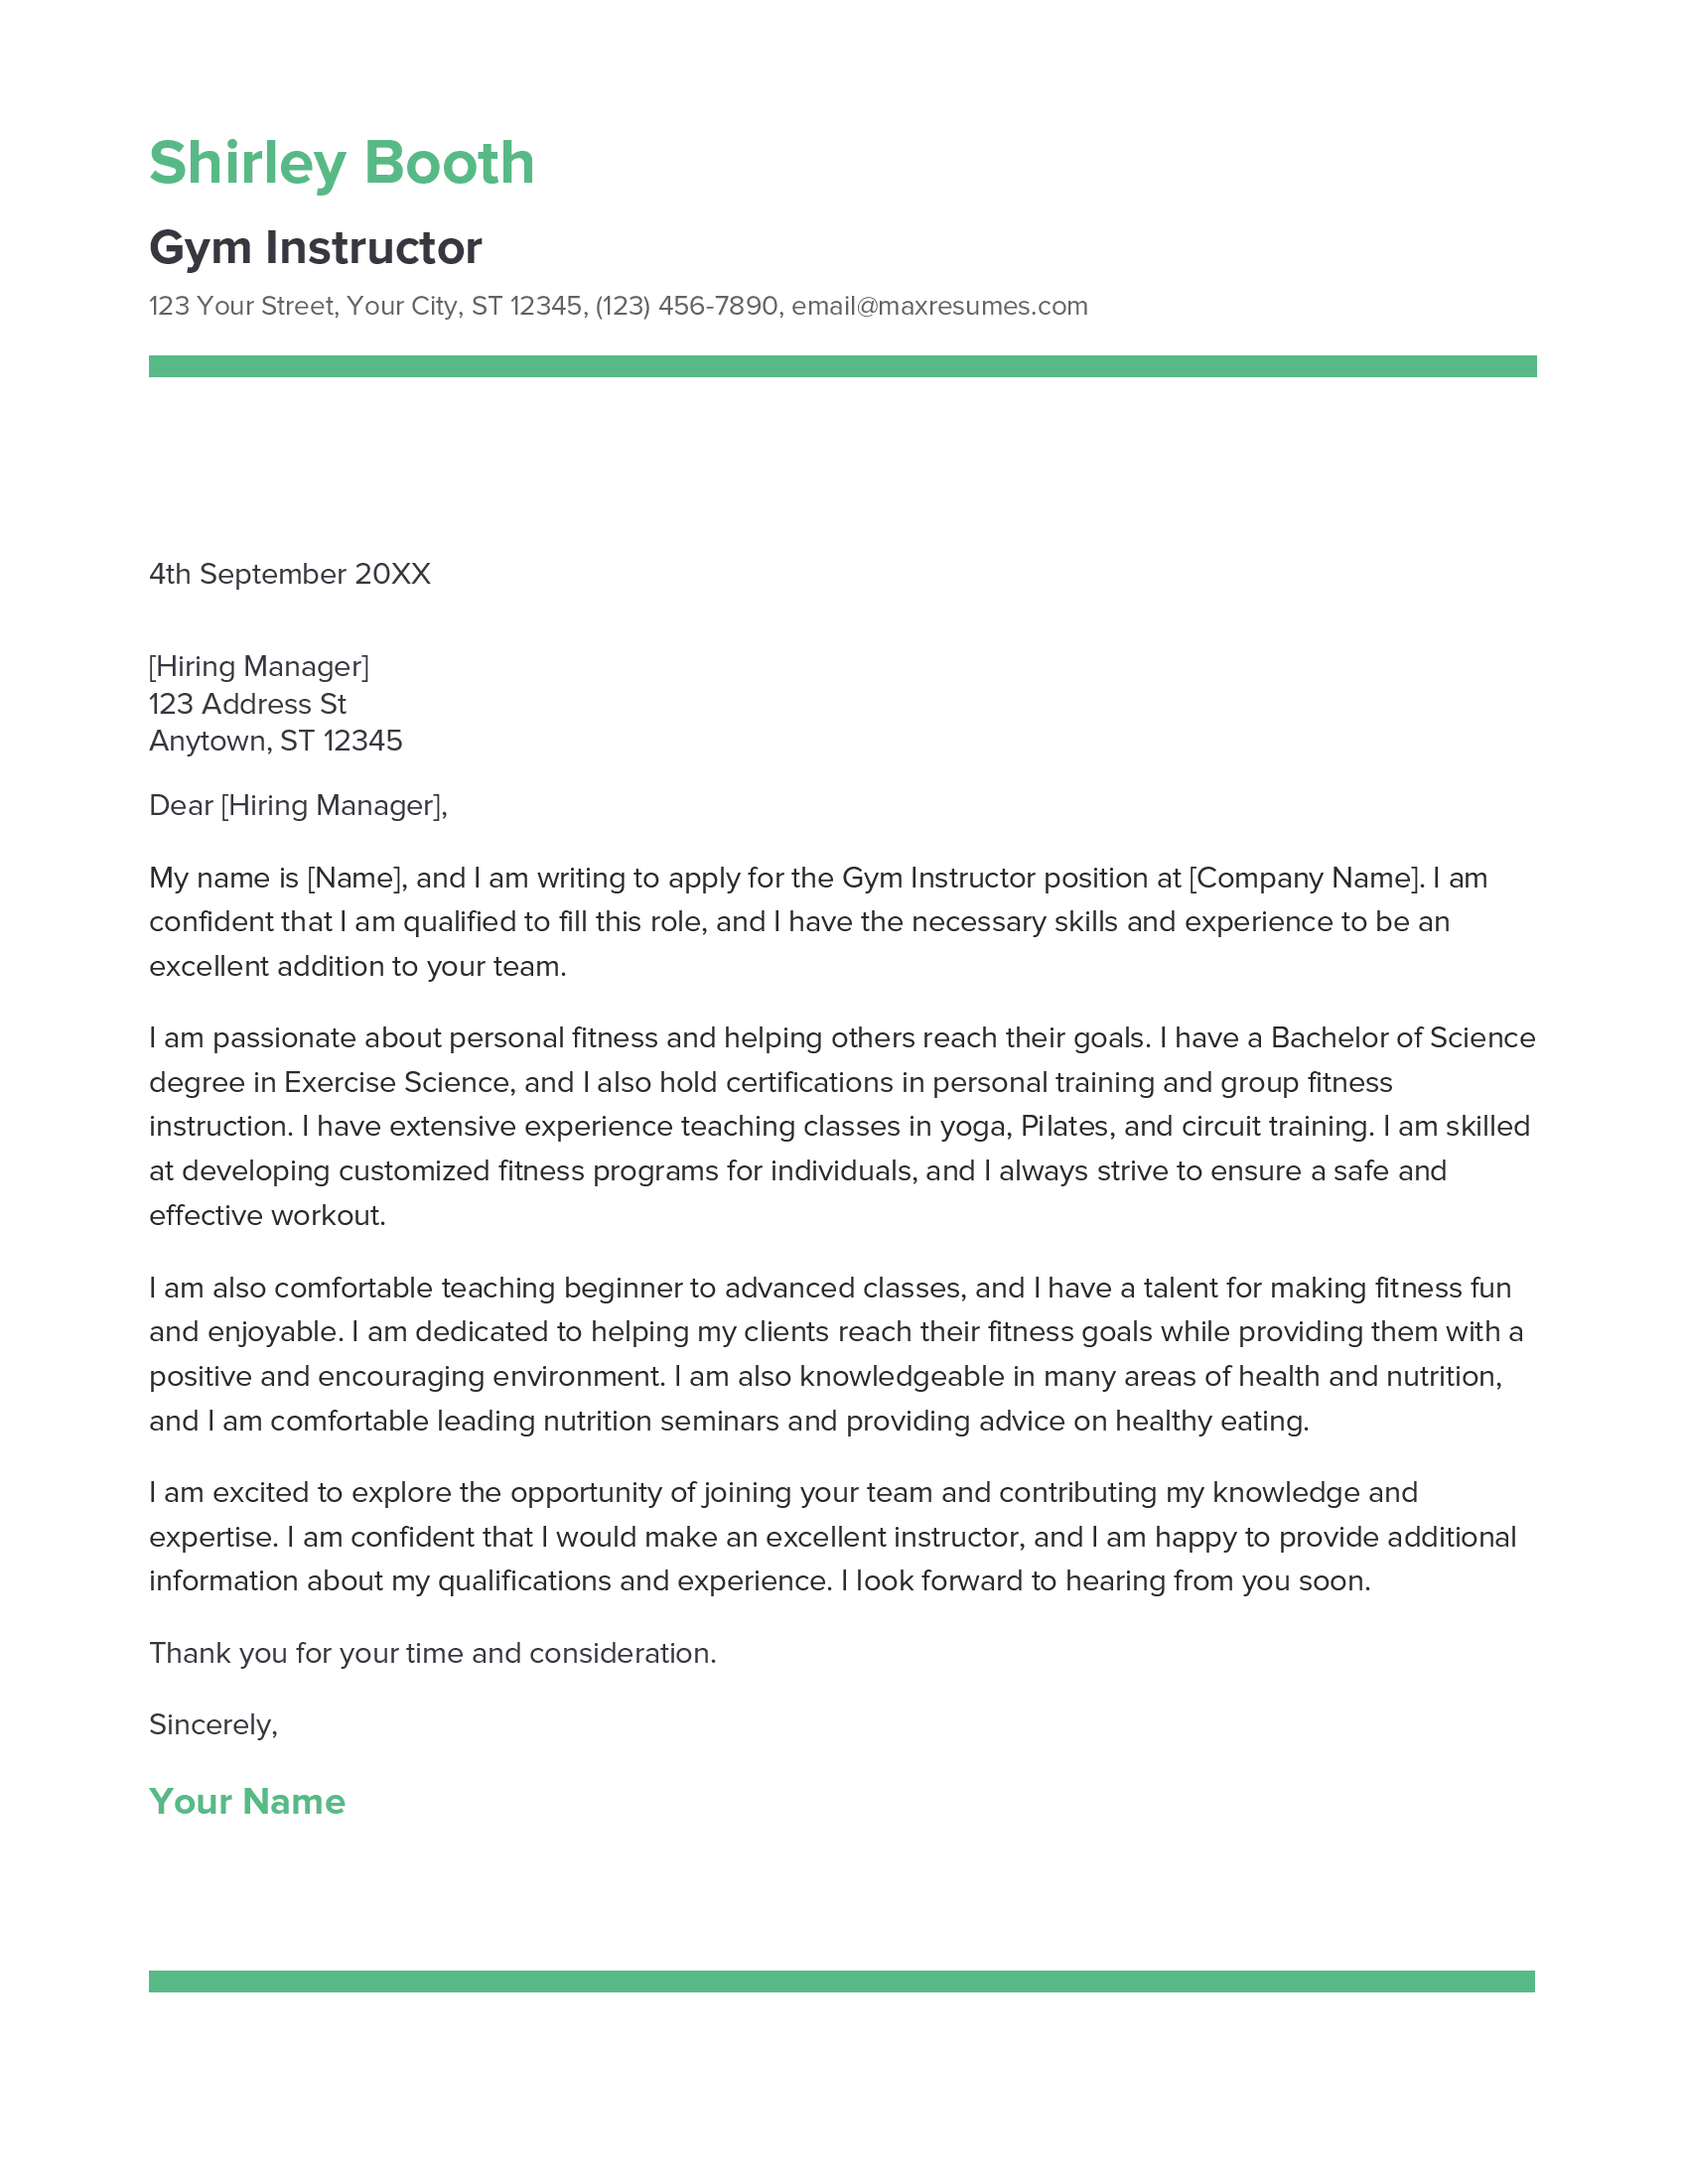 Gym Instructor Cover Letter Example